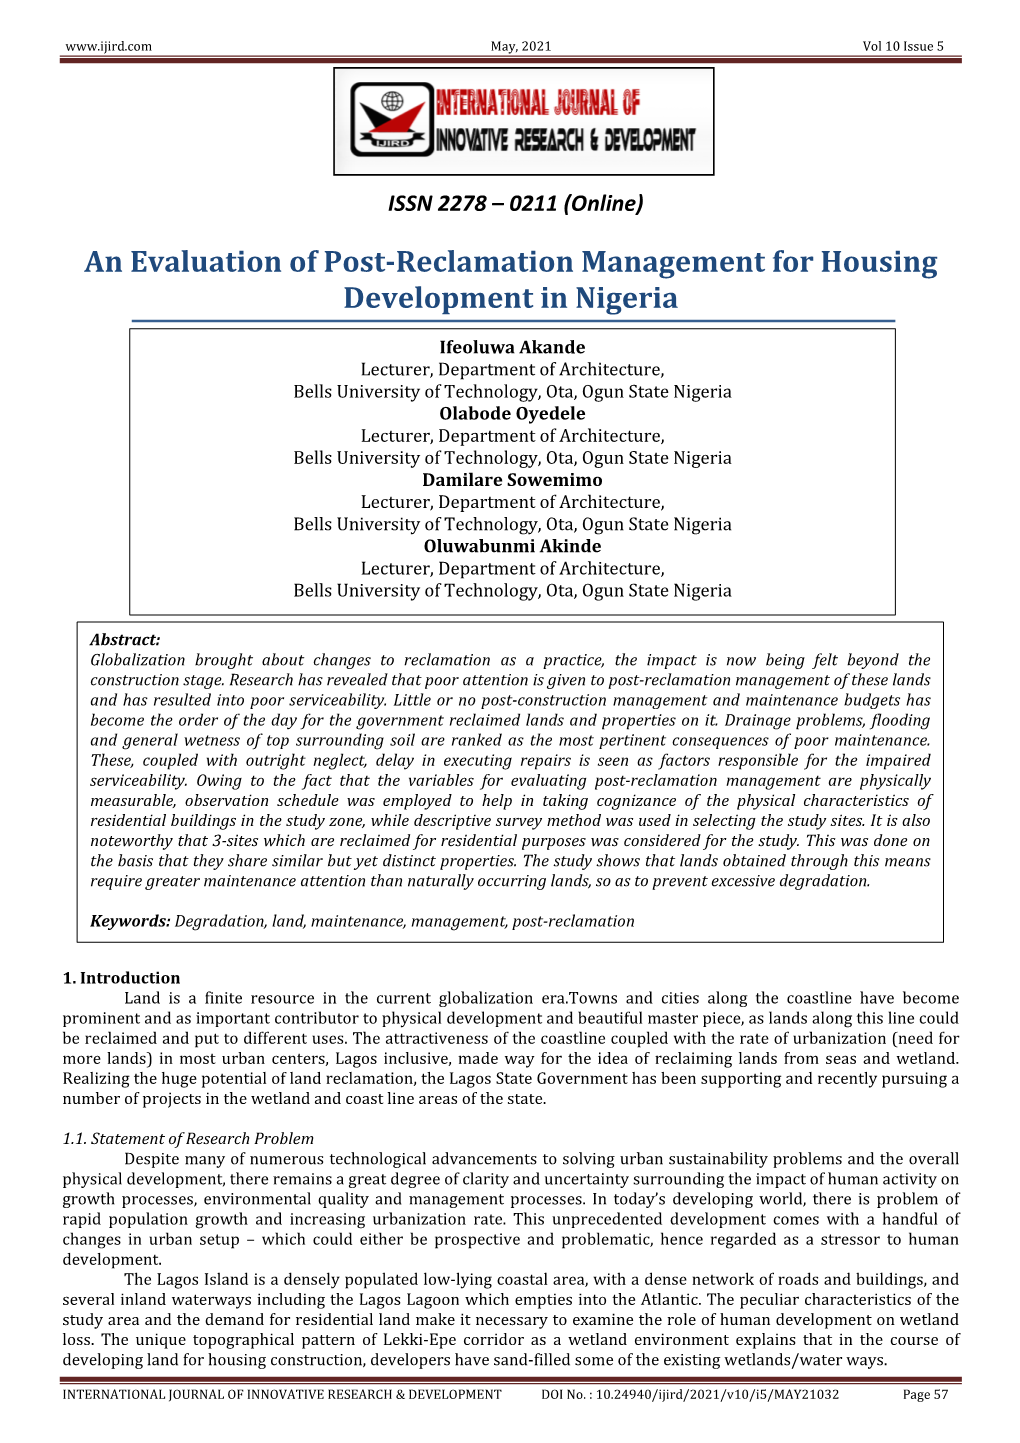 An Evaluation of Post-Reclamation Management for Housing Development in Nigeria